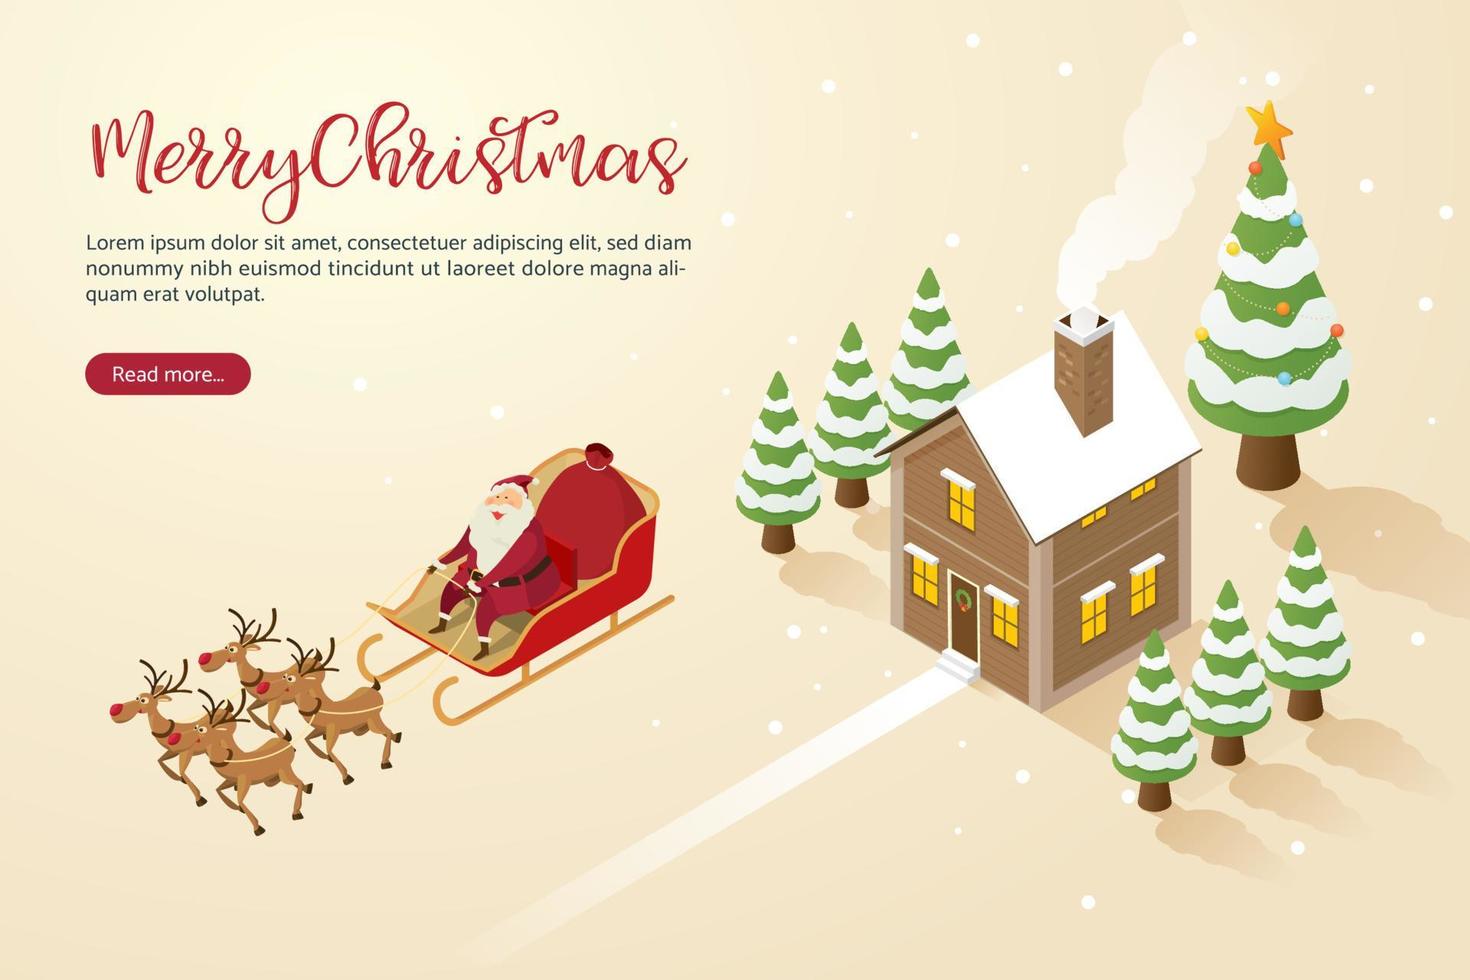 Merry Christmas santa claus with reindeer flying. vector